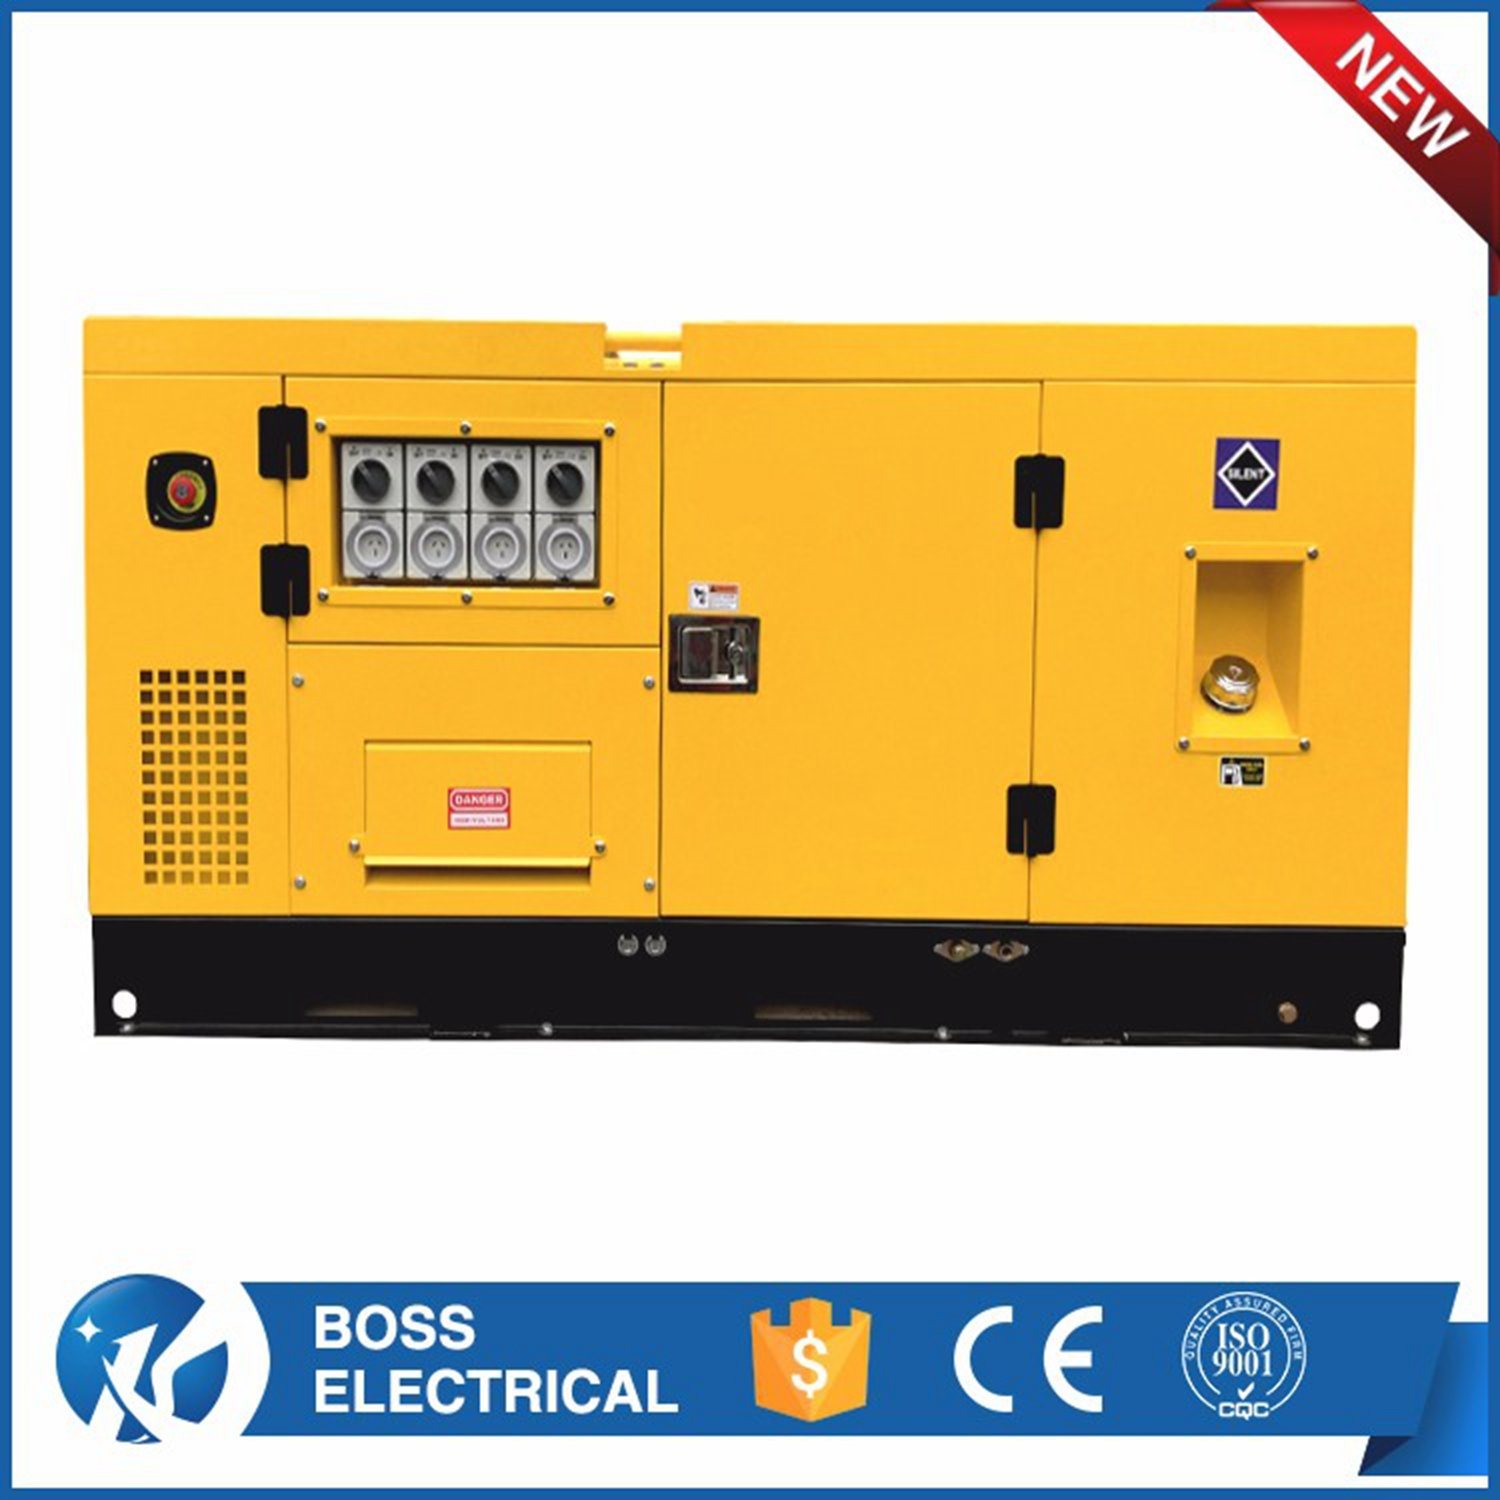 Ce Genset with Fawde Engine 50Hz Silent Type 16kVA